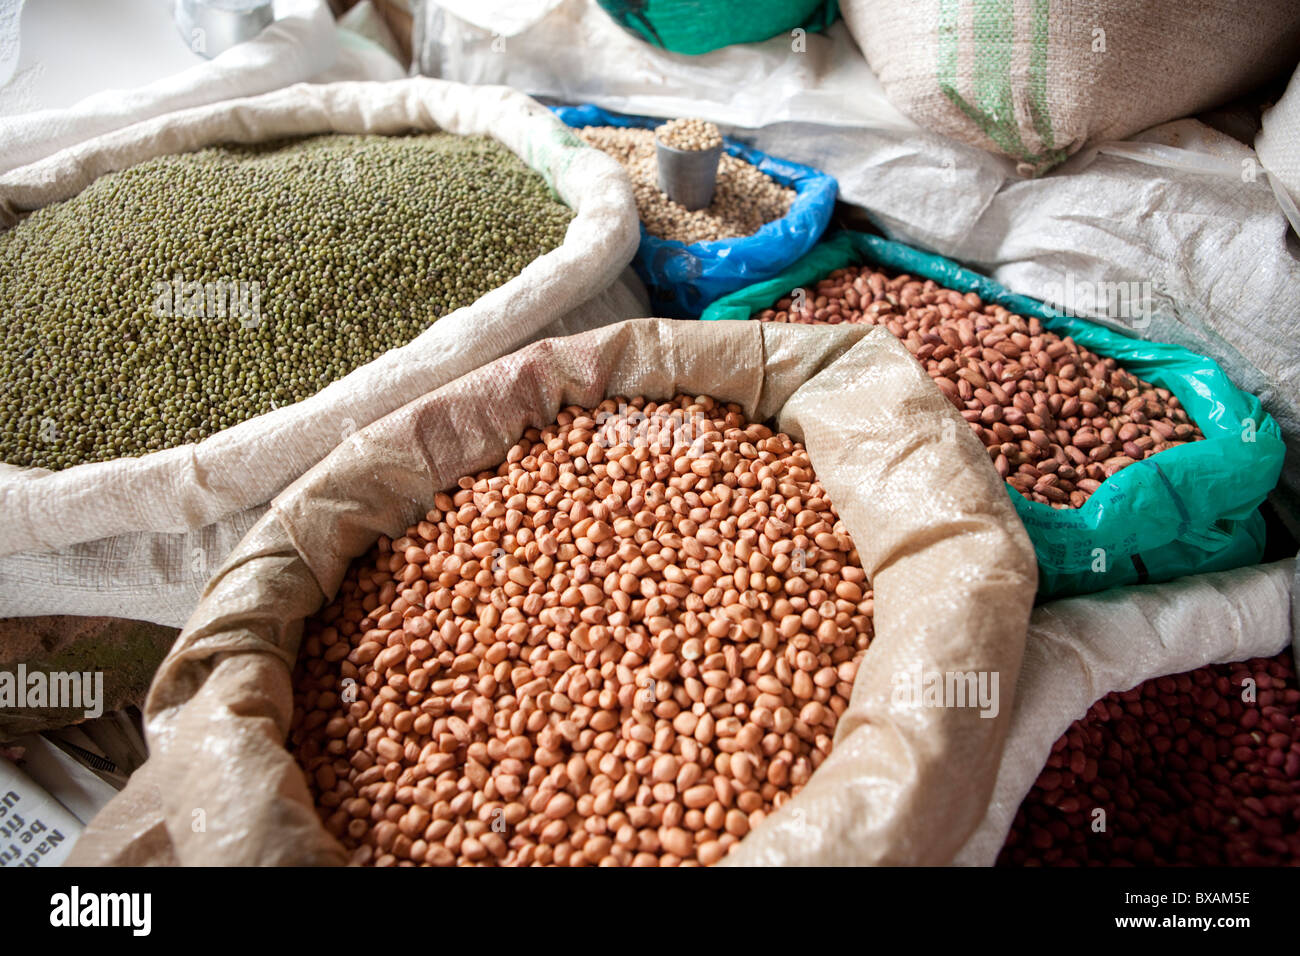 Nuts, legumes and peas are for sale in Iganga's central market - Iganga, Uganda, East Africa. Stock Photo